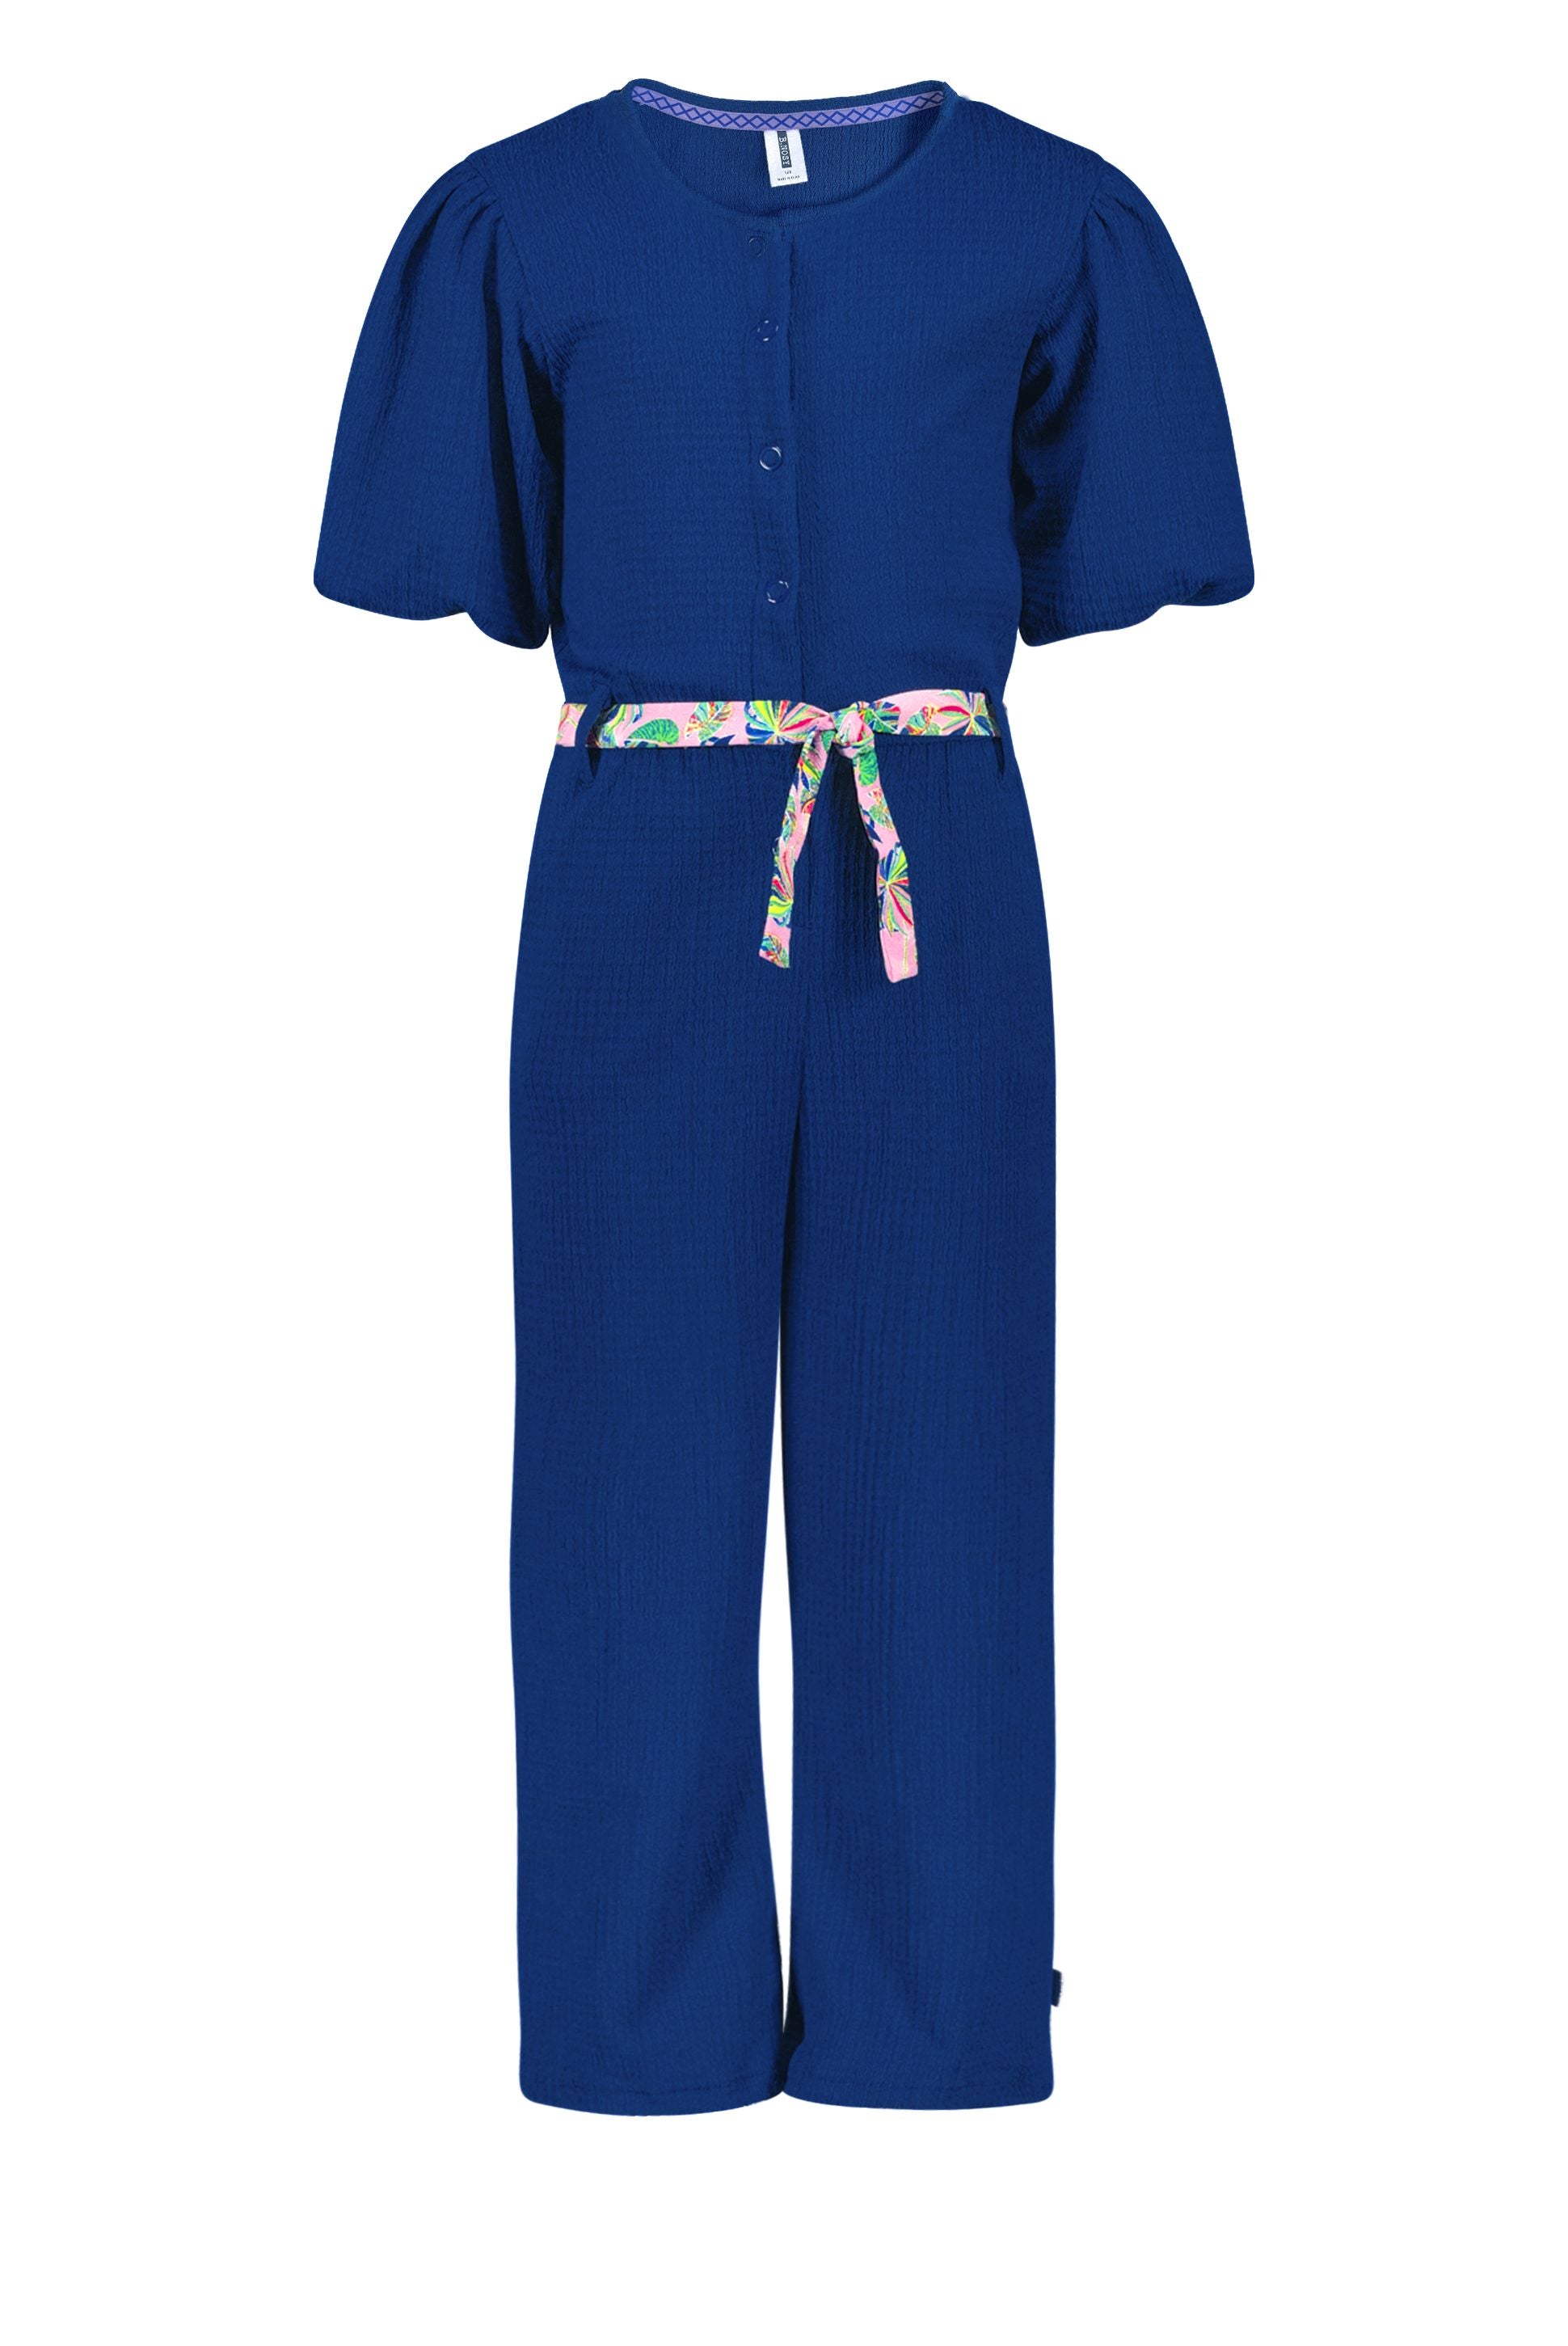 B.Nosy jumpsuit w/ puff sleeve and aop belt